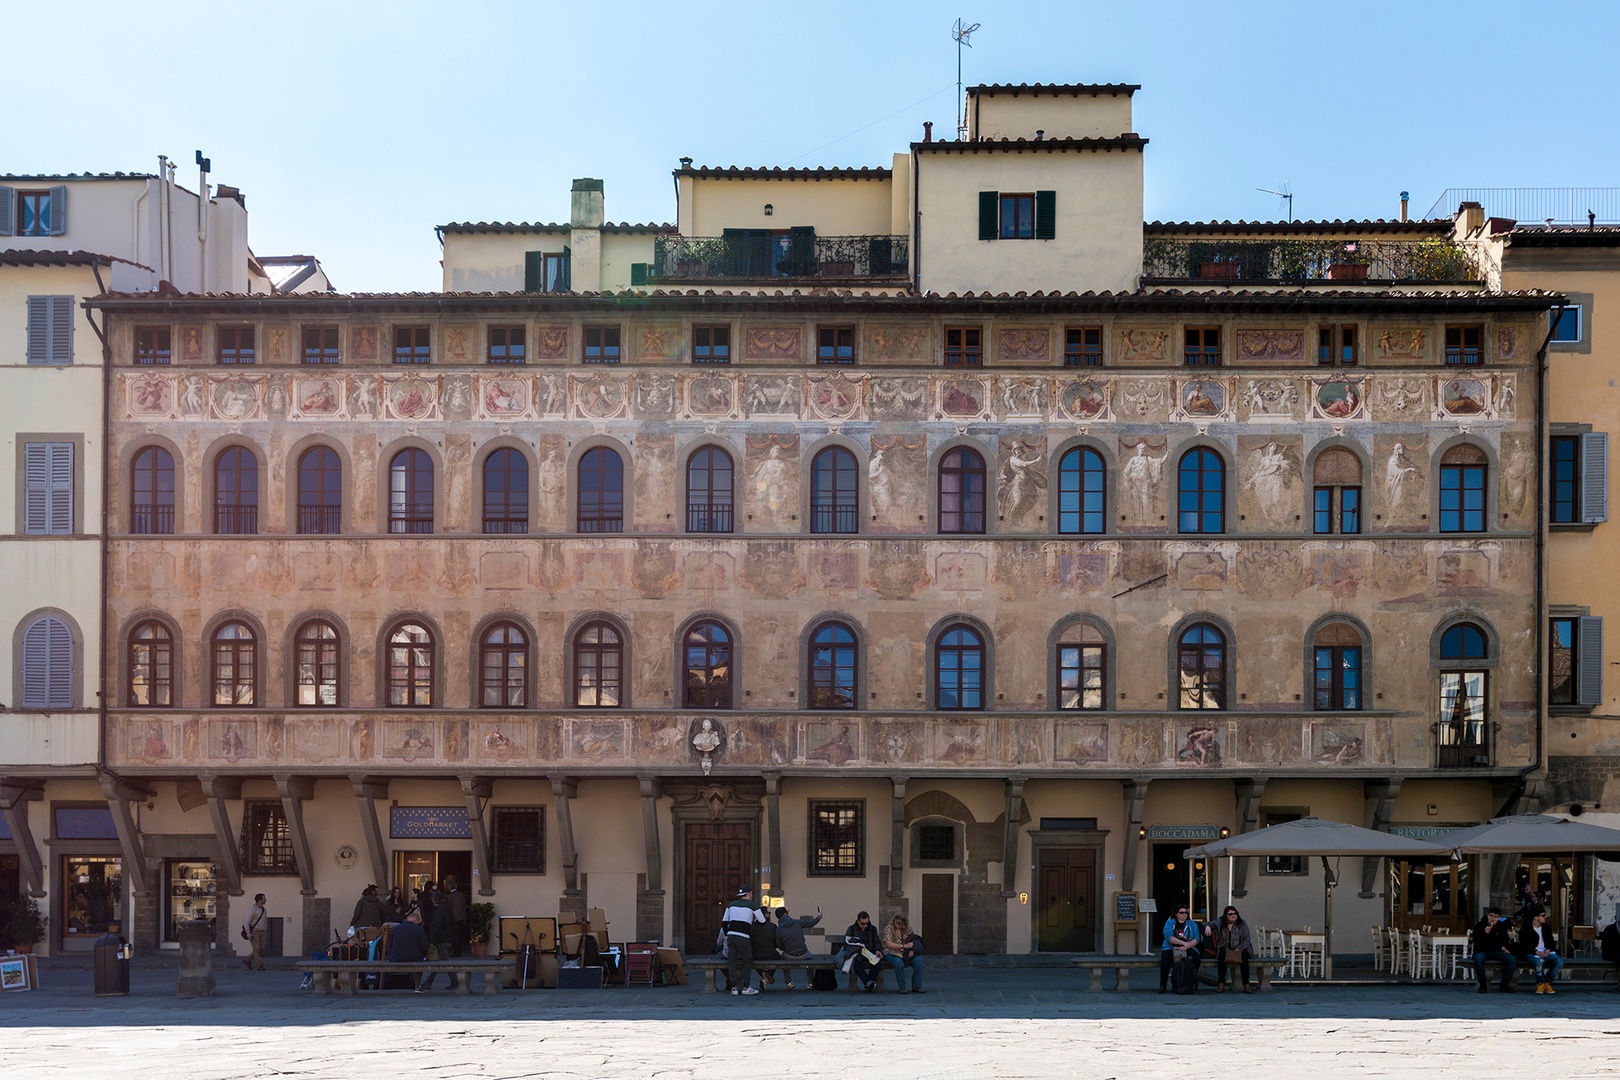 Imagine staying in this historic palace. The exterior is decorated with colorful frescoes from 1620.